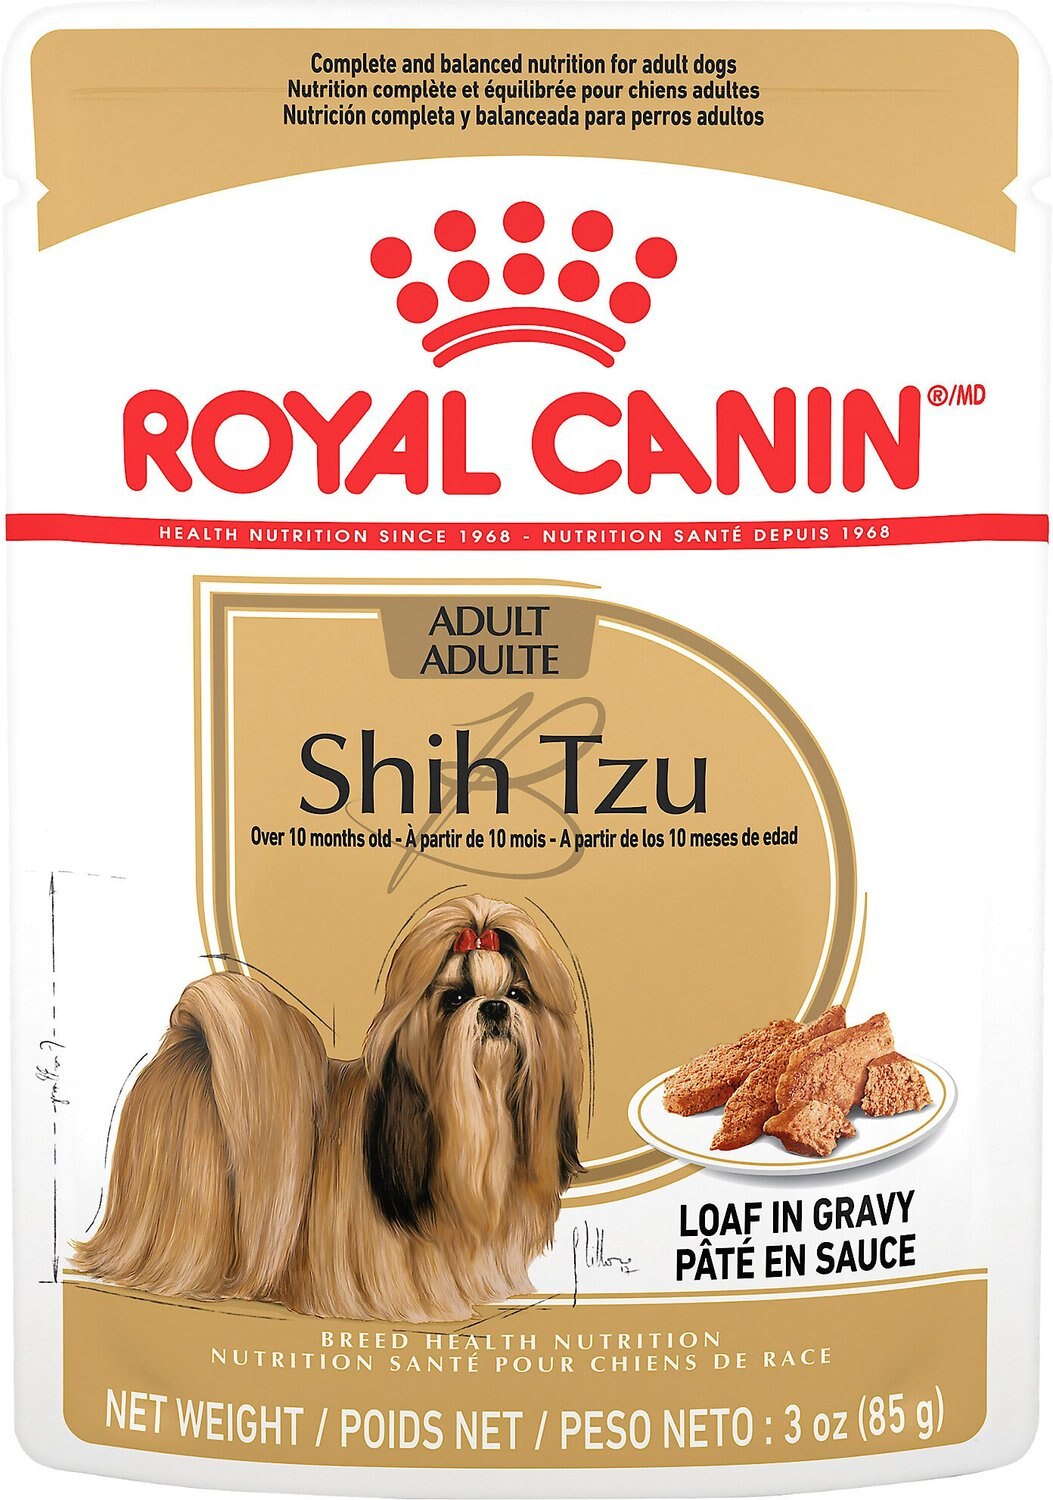 ROYAL CANIN Adult Shih Tzu Wet Dog Food, 3-oz pouch, case of 12 - Chewy.com